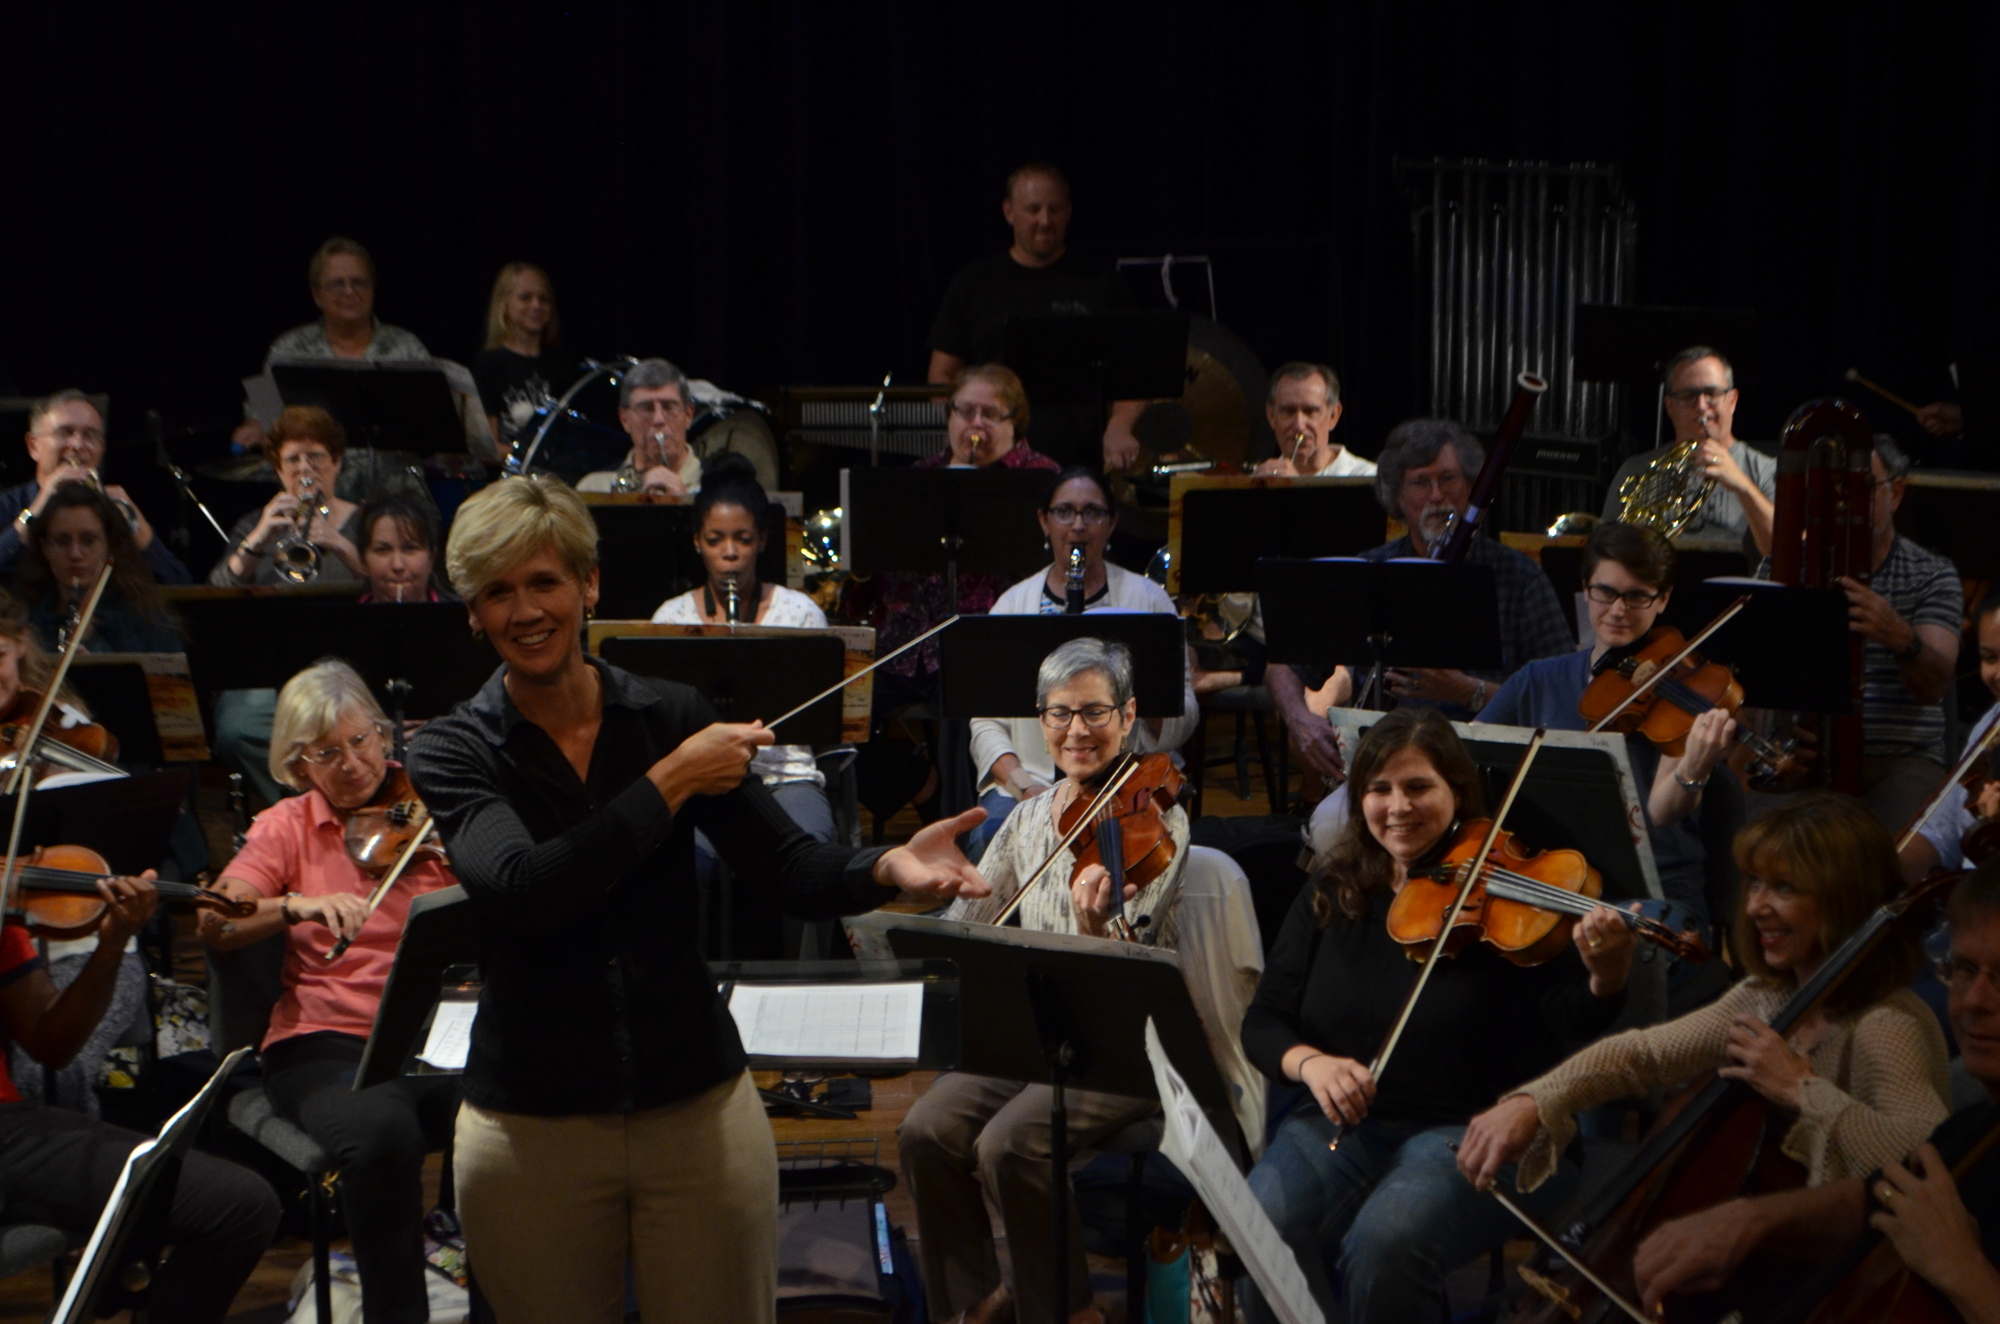 Robyn Bell,  conductor of The Pops Orchestra, wanted a piece to challenge the musicians.